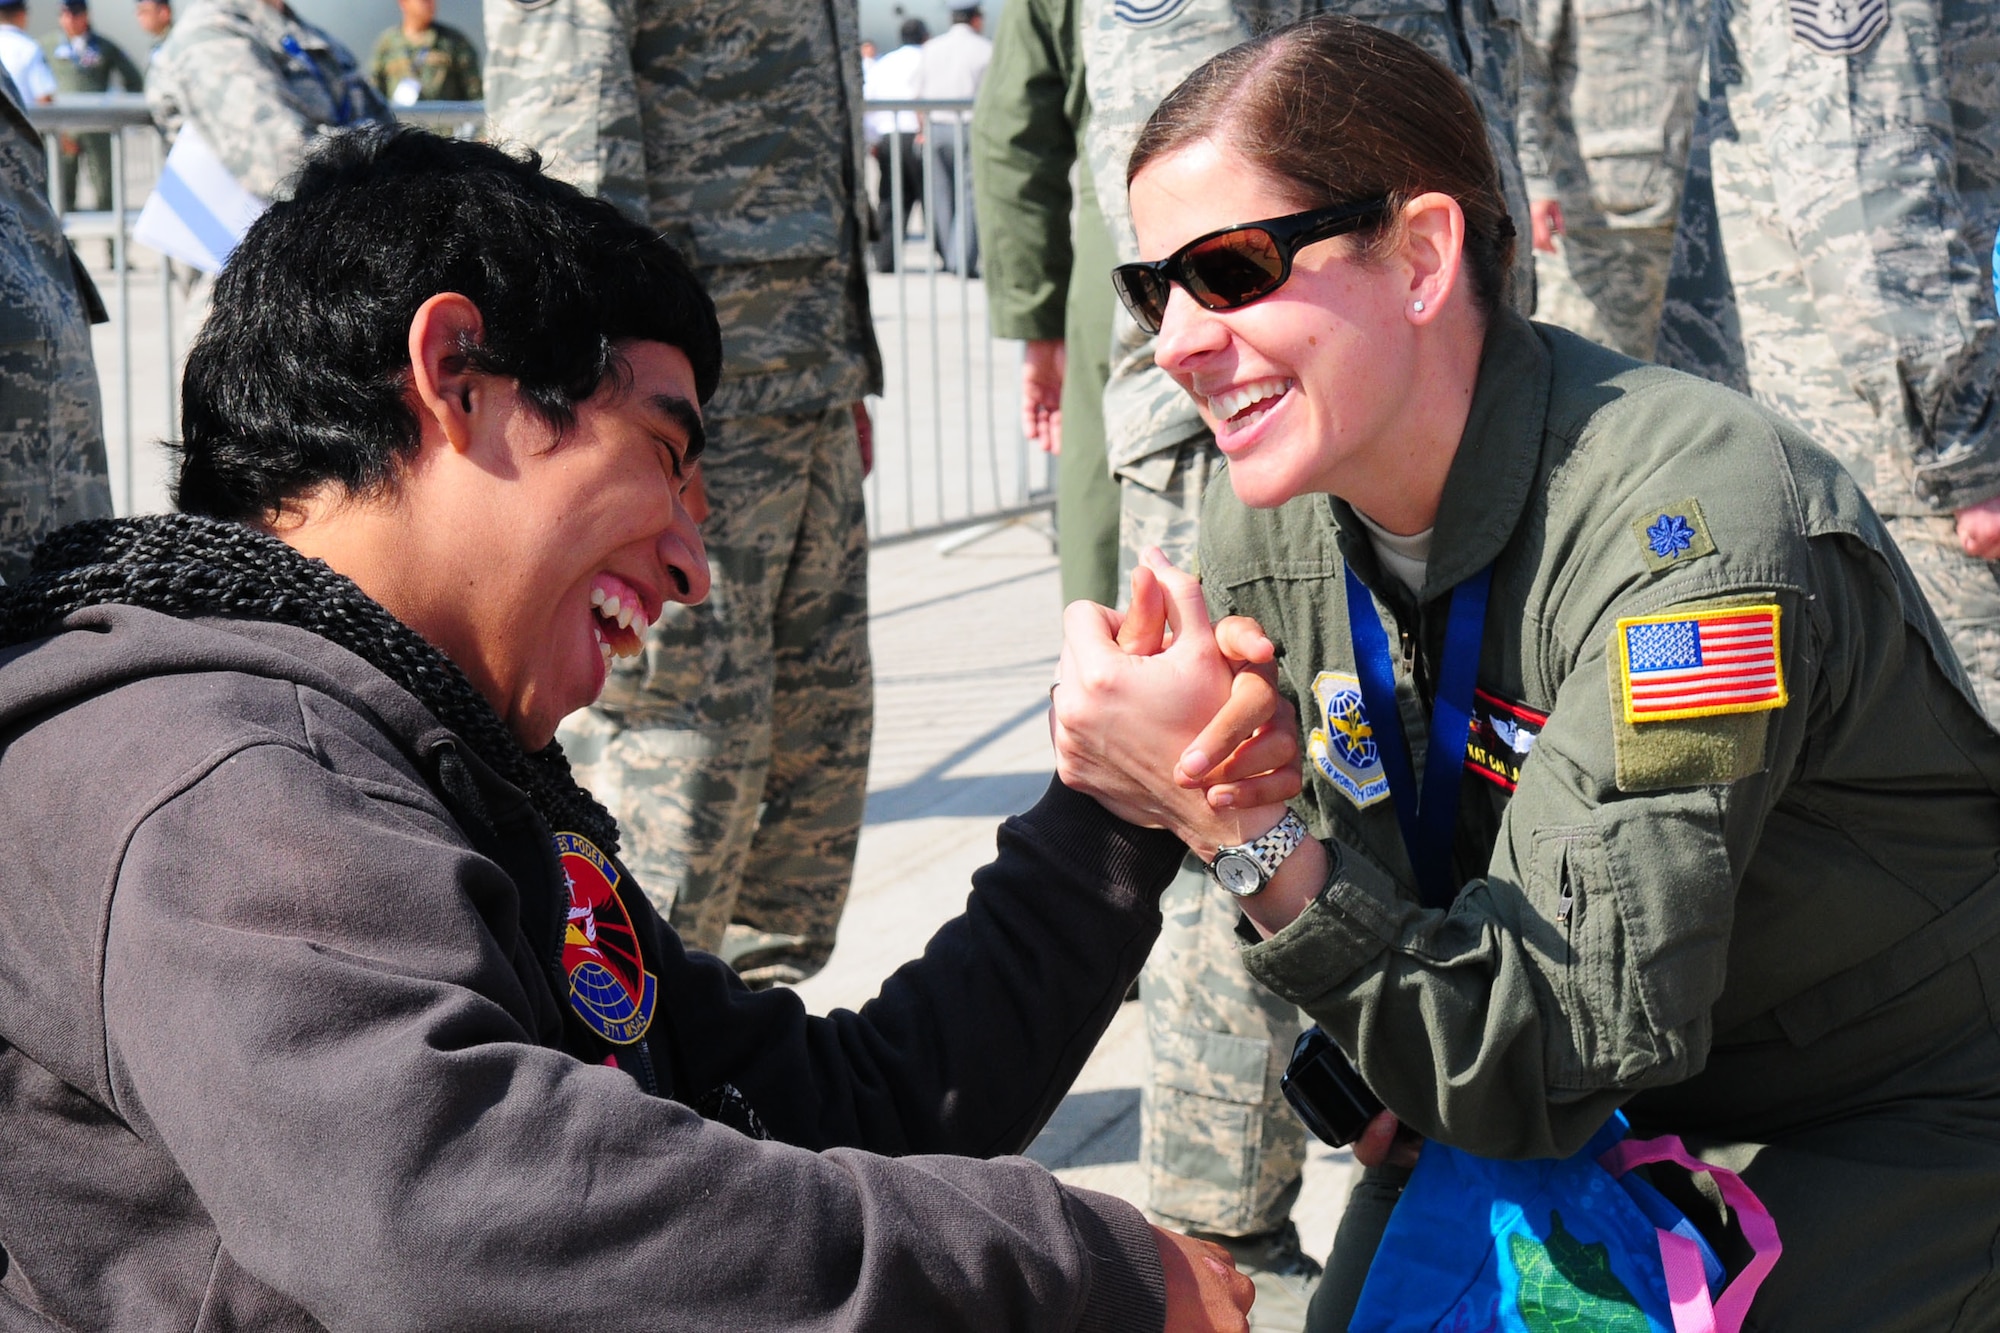 Lt. Col. Kat Callaghan, the 571st Mobility Support Advisory Squadron director of operations, spends time with a Chilean boy from the Telet?n Foundation at the FIDAE Air Show in Santiago, Chile, March 26. Nearly 60 U.S. airmen are participating in subject matter expert exchanges with Chilean air force counterparts during FIDAE, and as part of the events are hosting static displays of the C-130 Hercules and F-16. Airmen from the Texas Air National Guard set aside time to host the children before the public days of FIDAE, which are scheduled for the weekend. (U.S. Air Force photo by Senior Master Sgt. Miguel Arellano/Released)